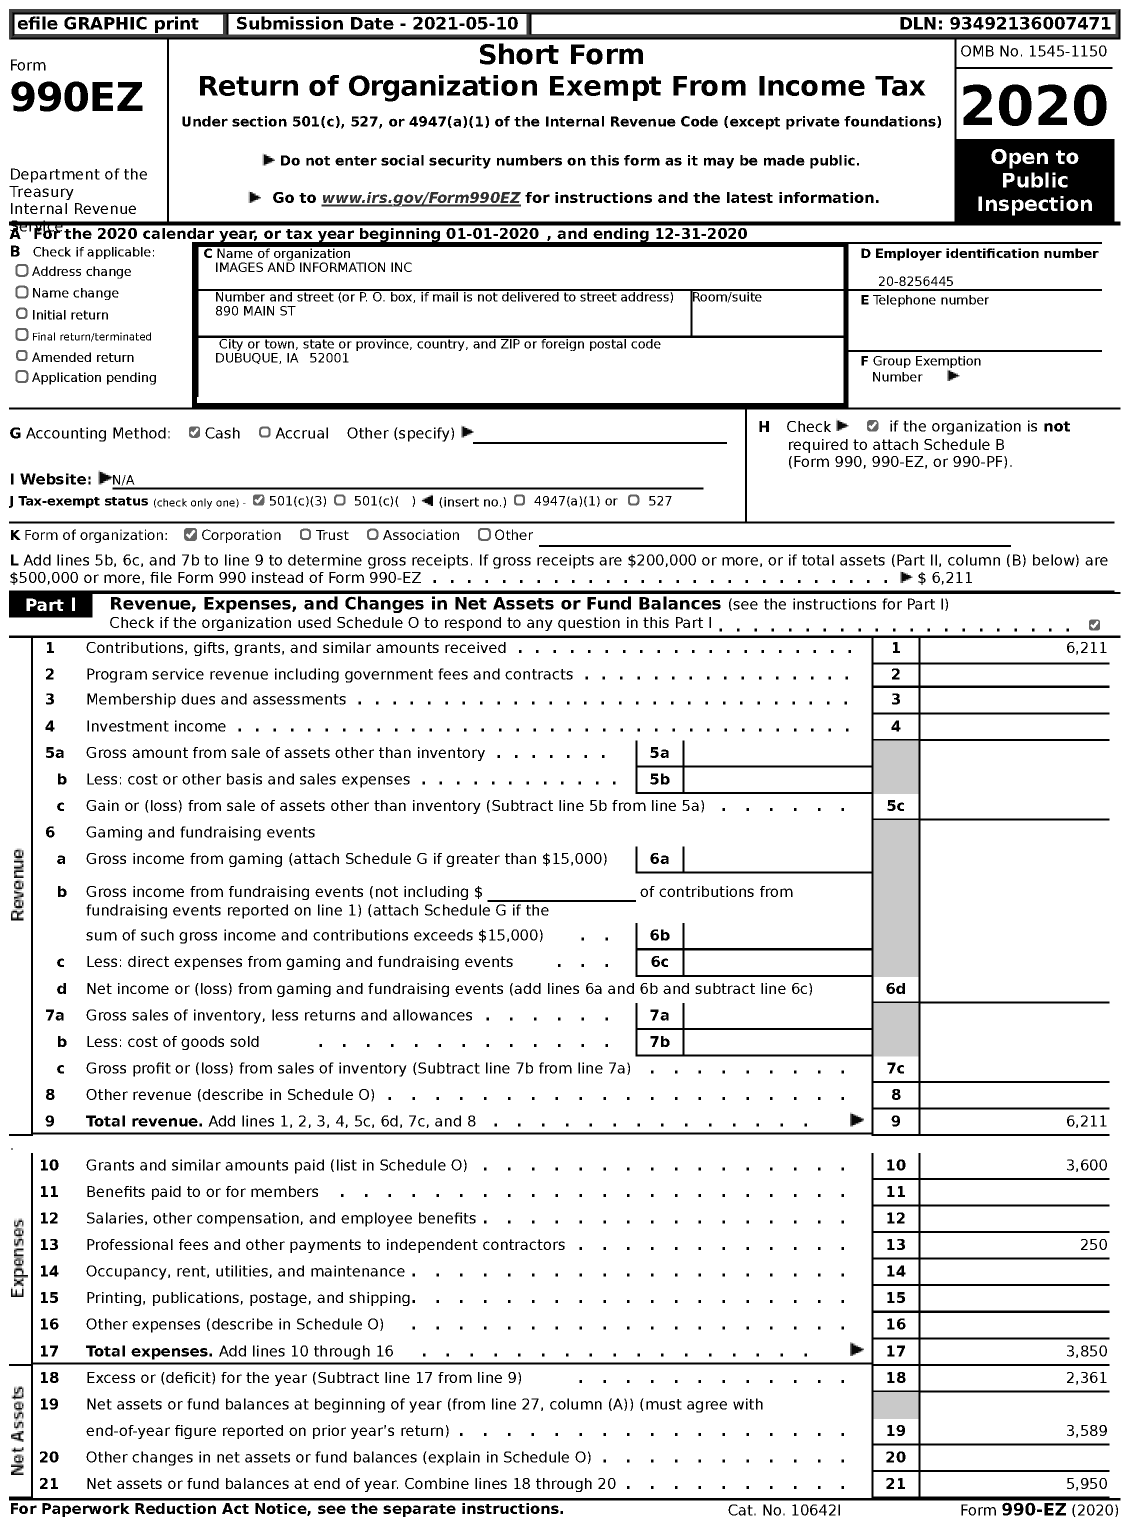 Image of first page of 2020 Form 990EZ for Images and Information